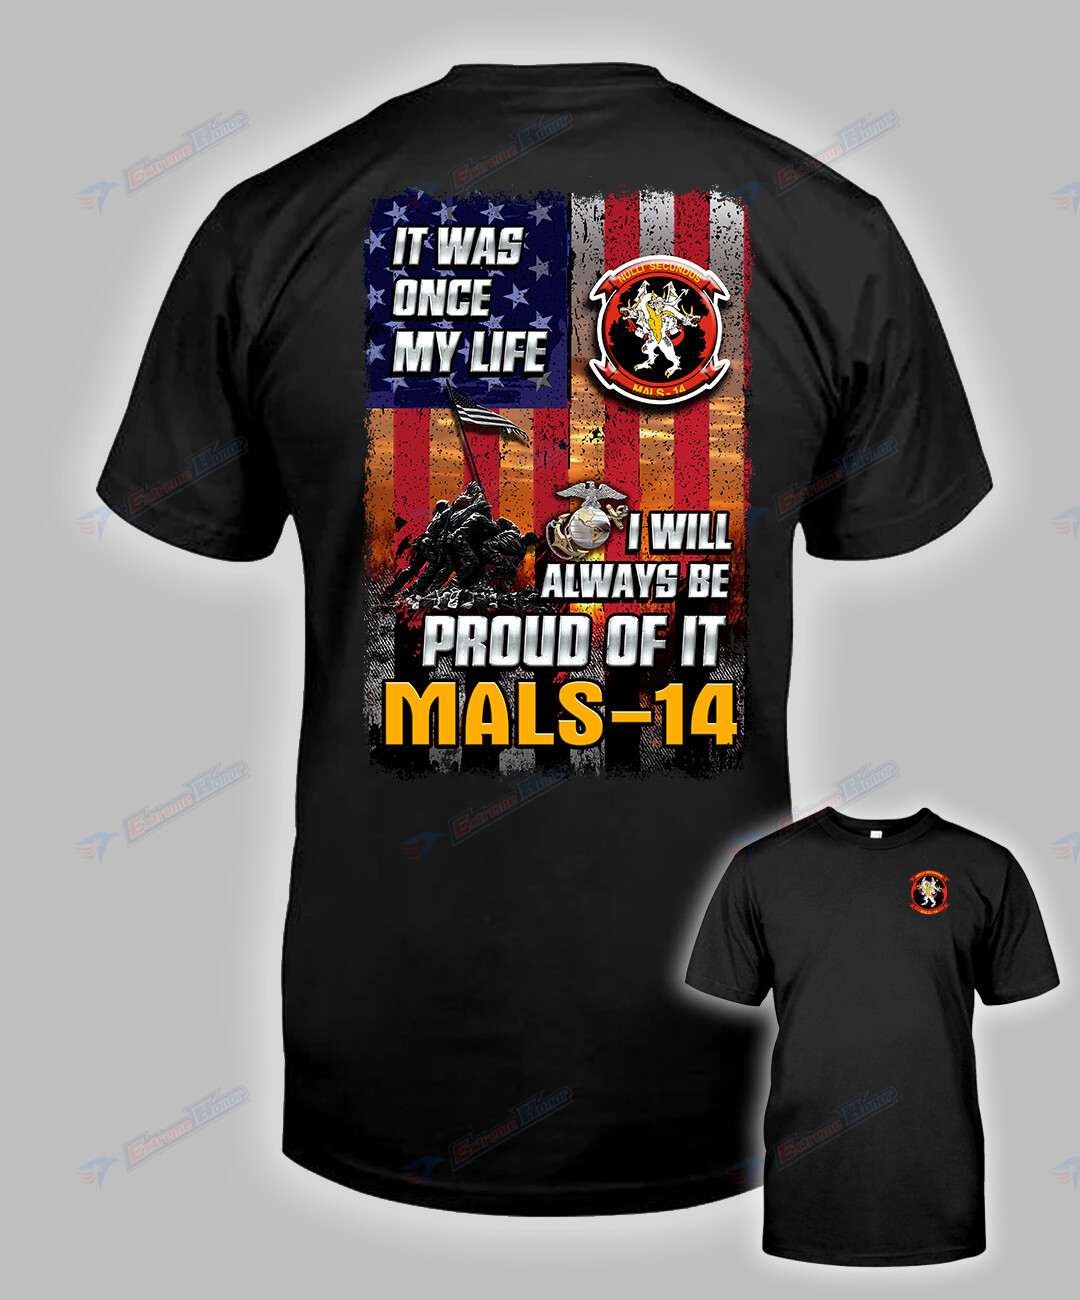 MALS-14 - 2 sided shirt - extreme-honor